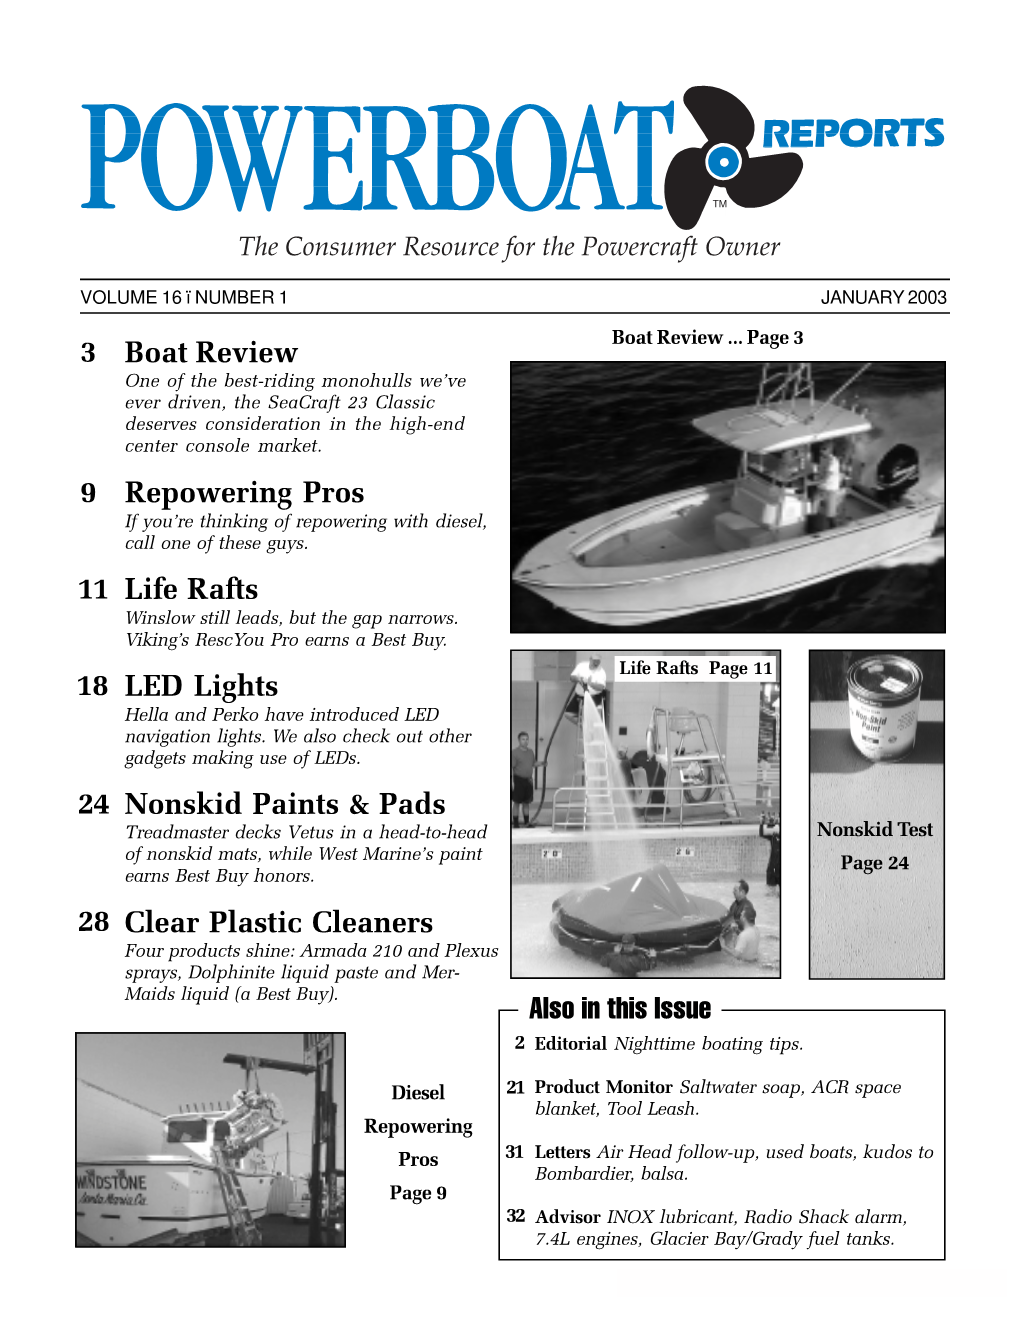 Boat Review Repowering Pros Life Rafts LED Lights Nonskid Paints